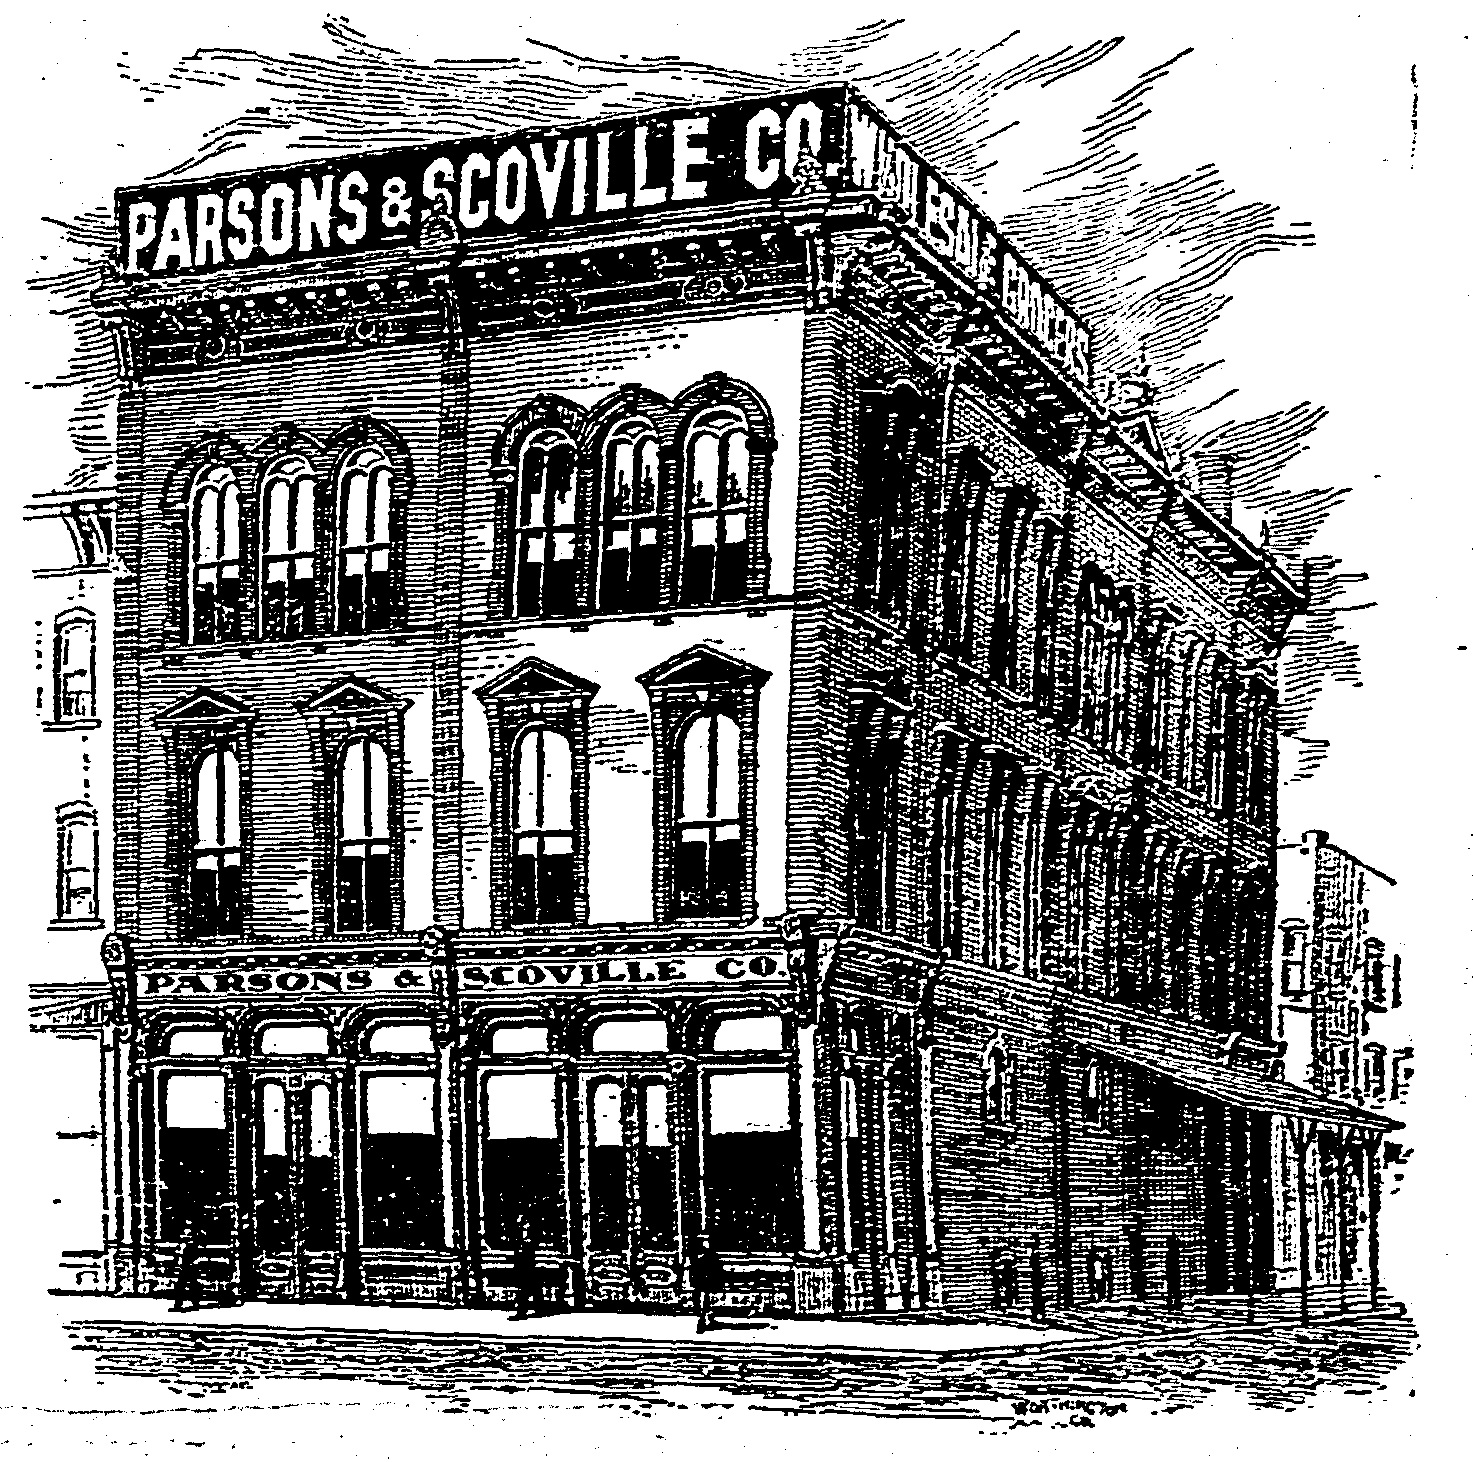 Old Parsons & Scoville